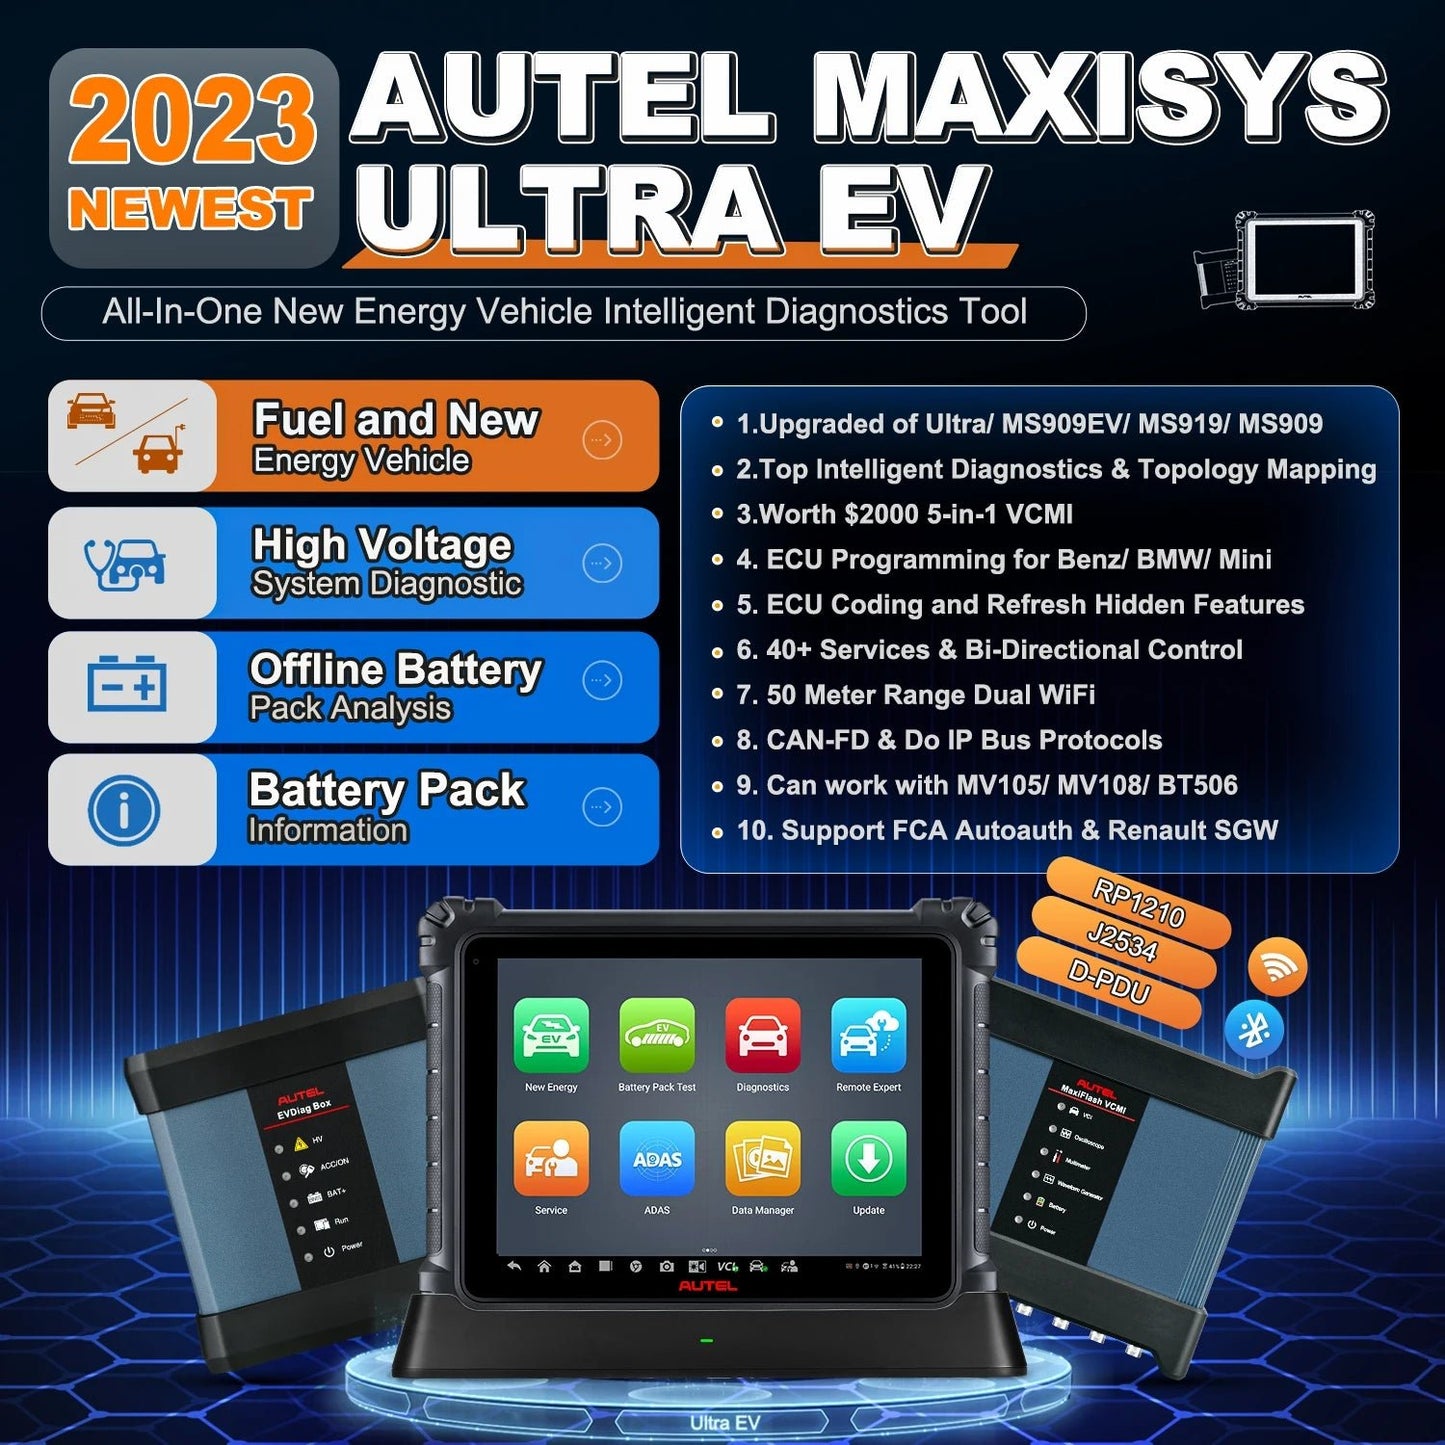 Autel Maxisys Ultra EV Scanner Top Intelligent Electric Vehicle Diagnostic Scan Tool with 5-in-1VCMI, ECU Programming & Coding - Dynamex